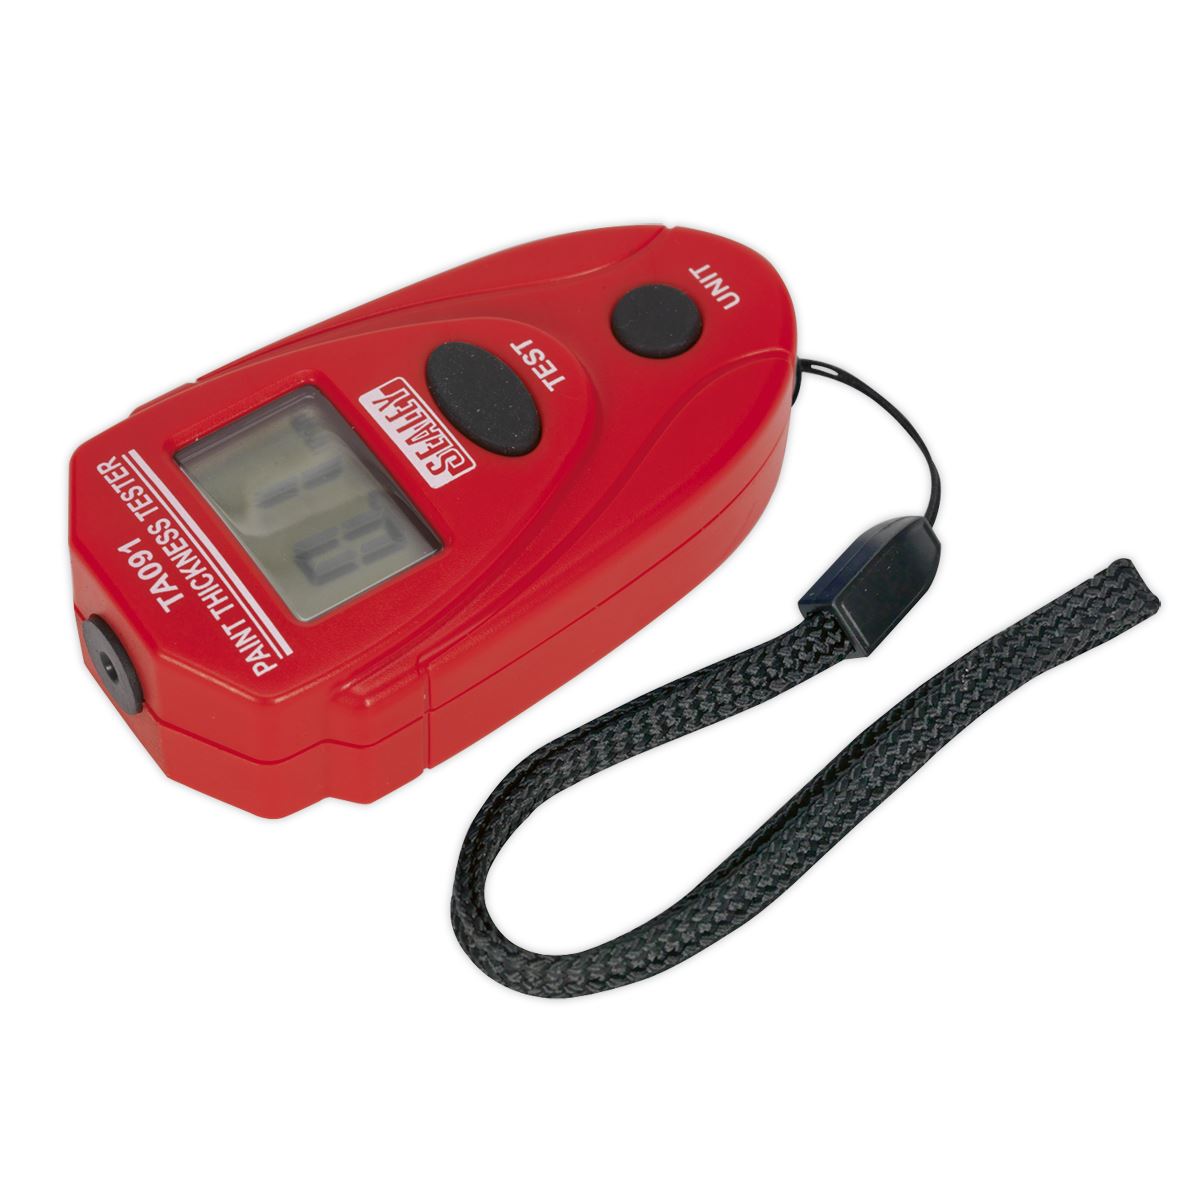 Sealey Paint Thickness Gauge 0-2mm Range